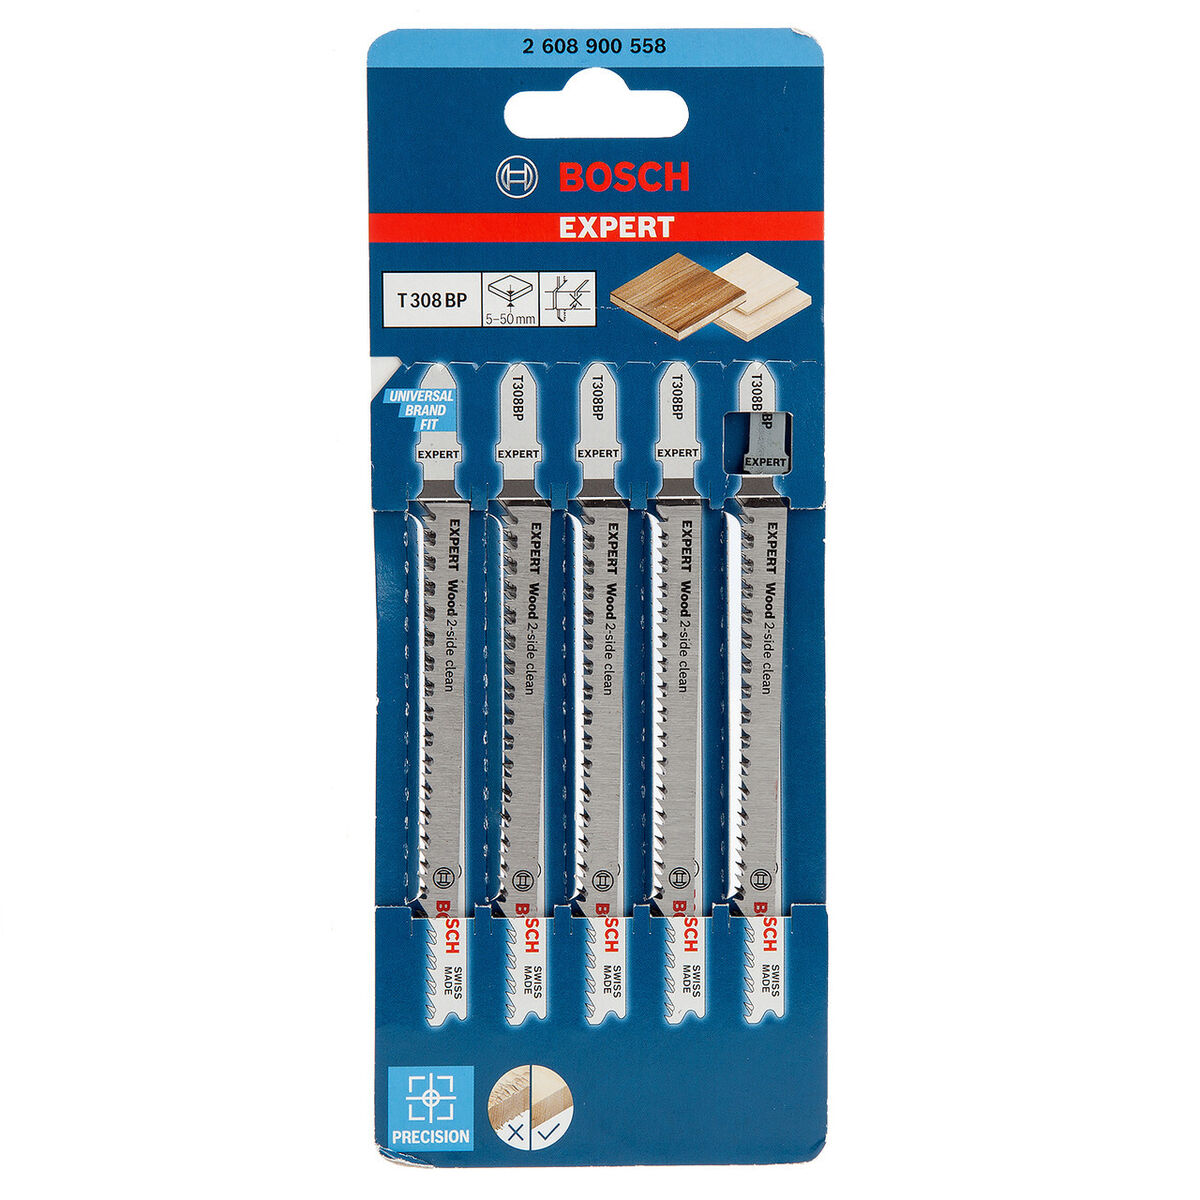 Bosch Jigsaw Blades T 308 BP Precision for Wood 5 Pack 2608900558 Power Tool Services